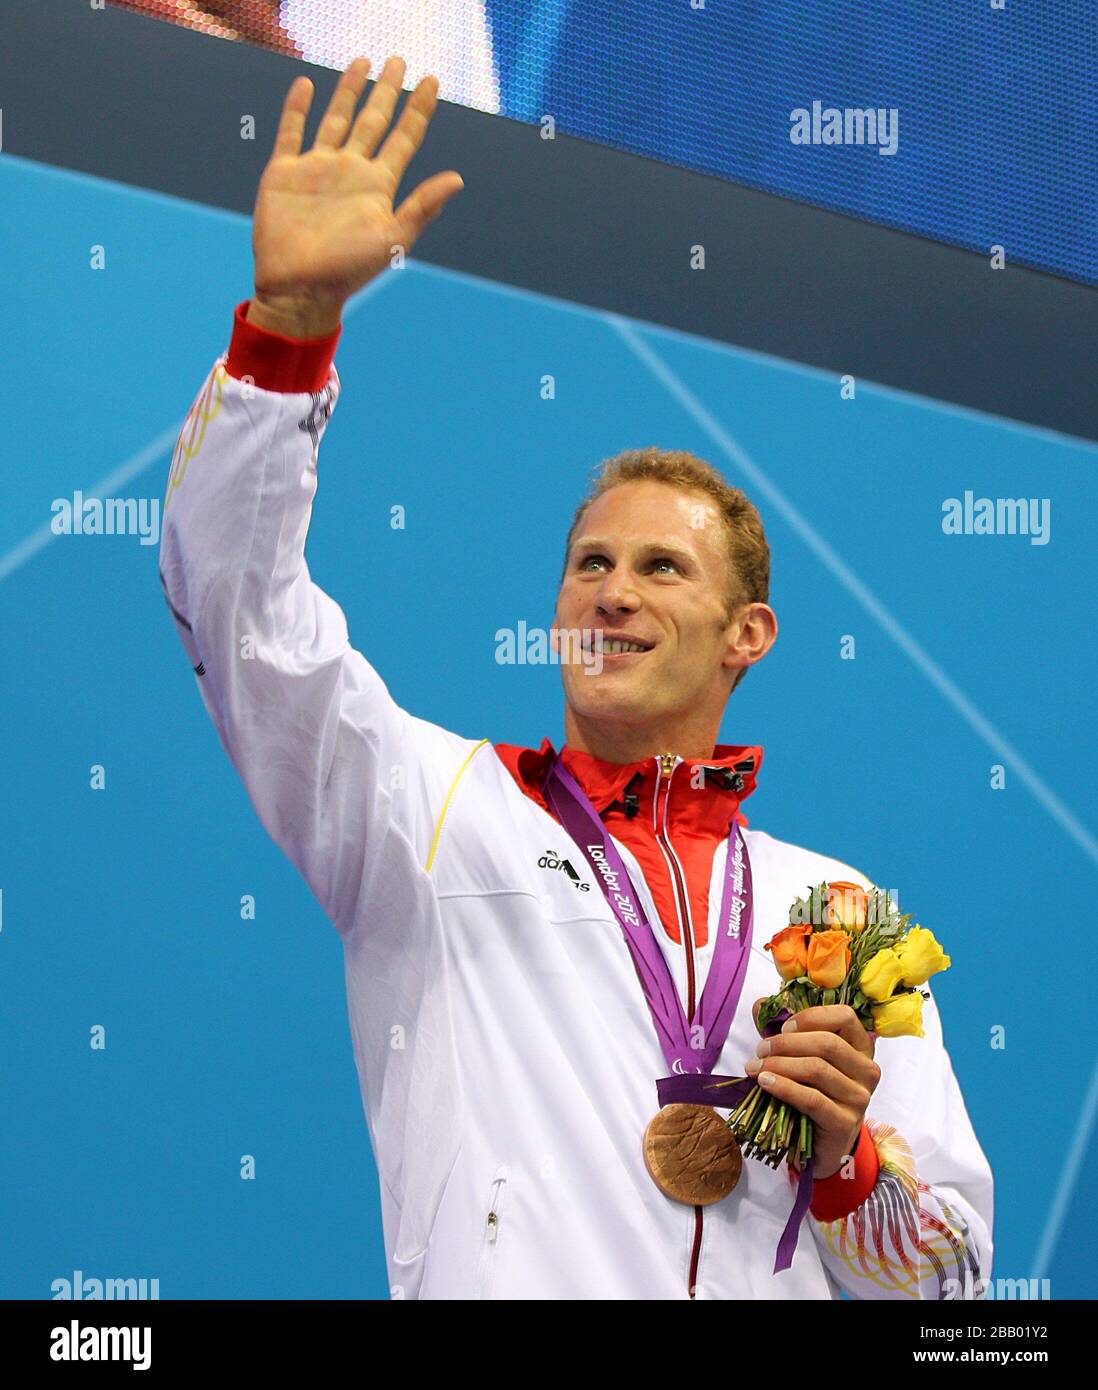 Bronze Medalist Germany's Christoph Burkard after the Men's 100m Breaststroke - SB6 Final at the Aquatics Centre, London. Stock Photo